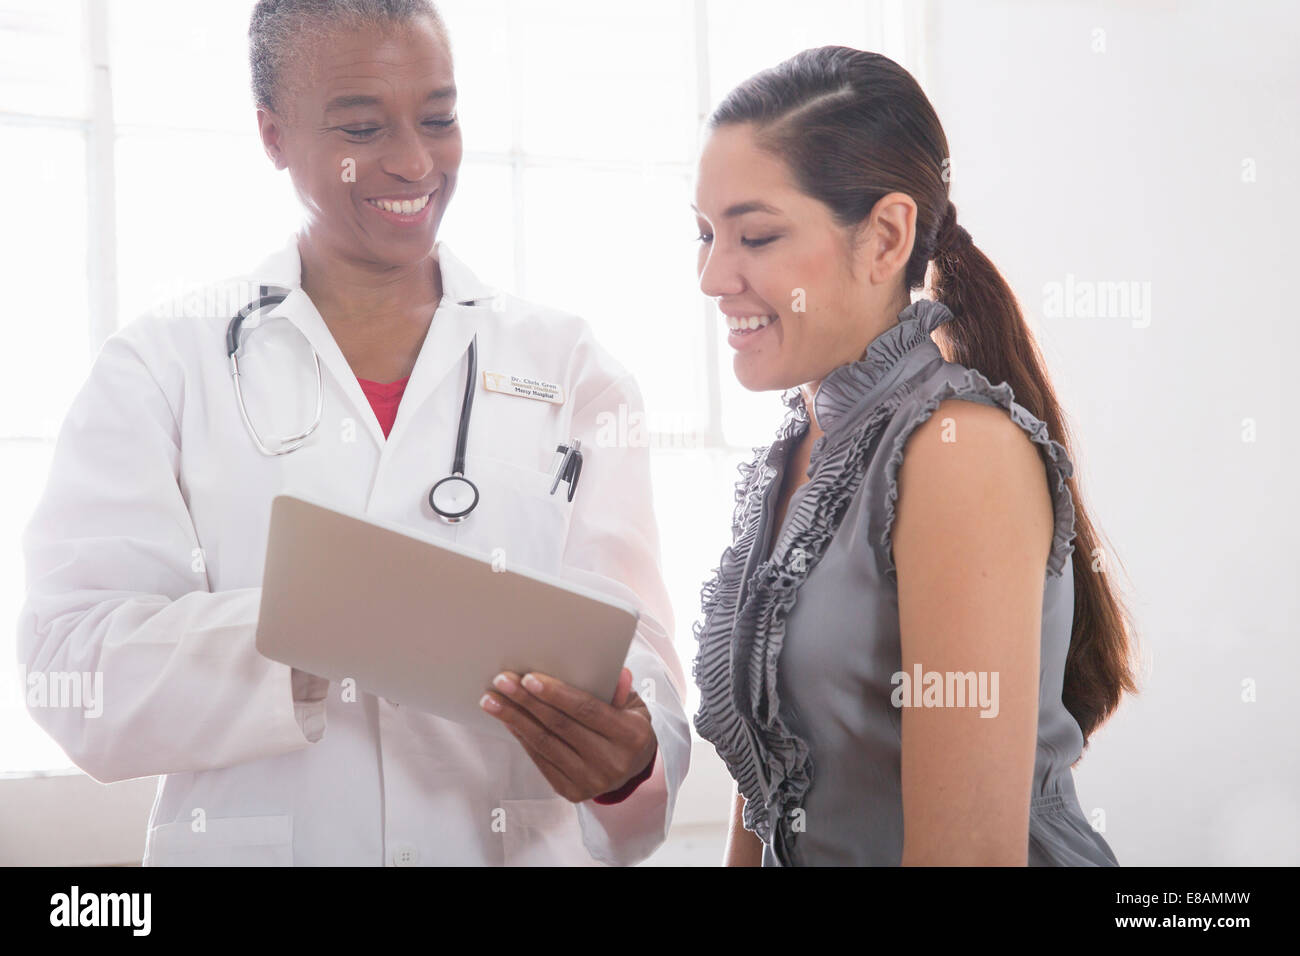 Female doctor showing patient digital tablet Stock Photo